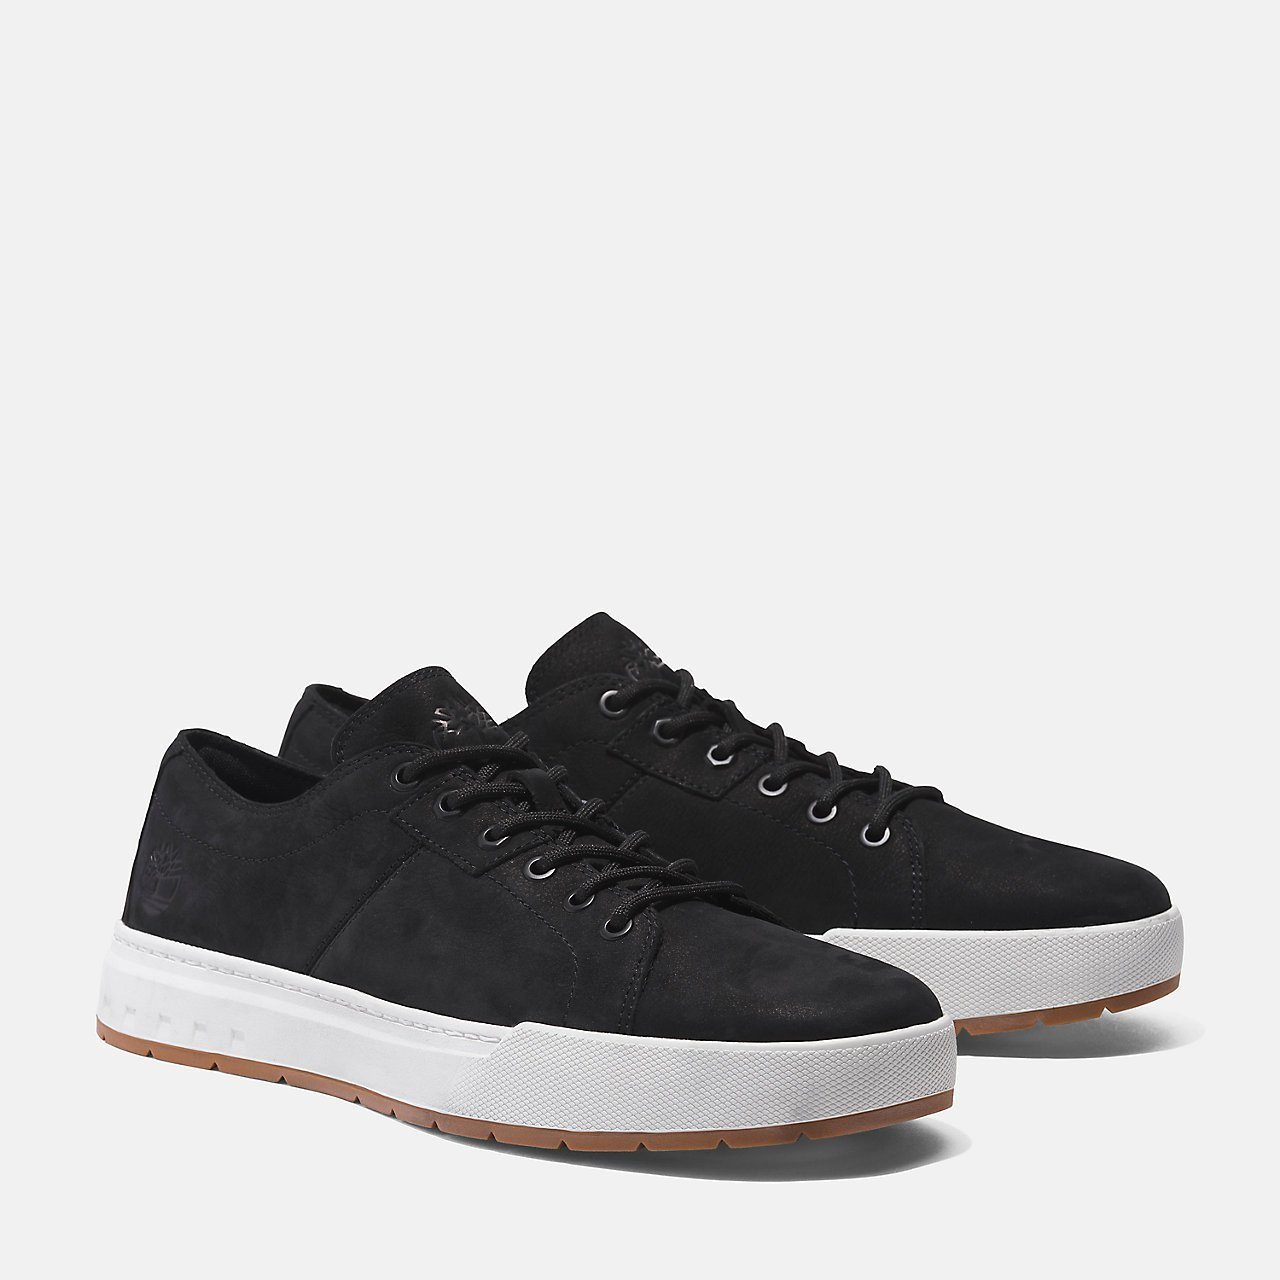 Timberland Maple Grove LOW LACE UP SNEAKER Sneaker